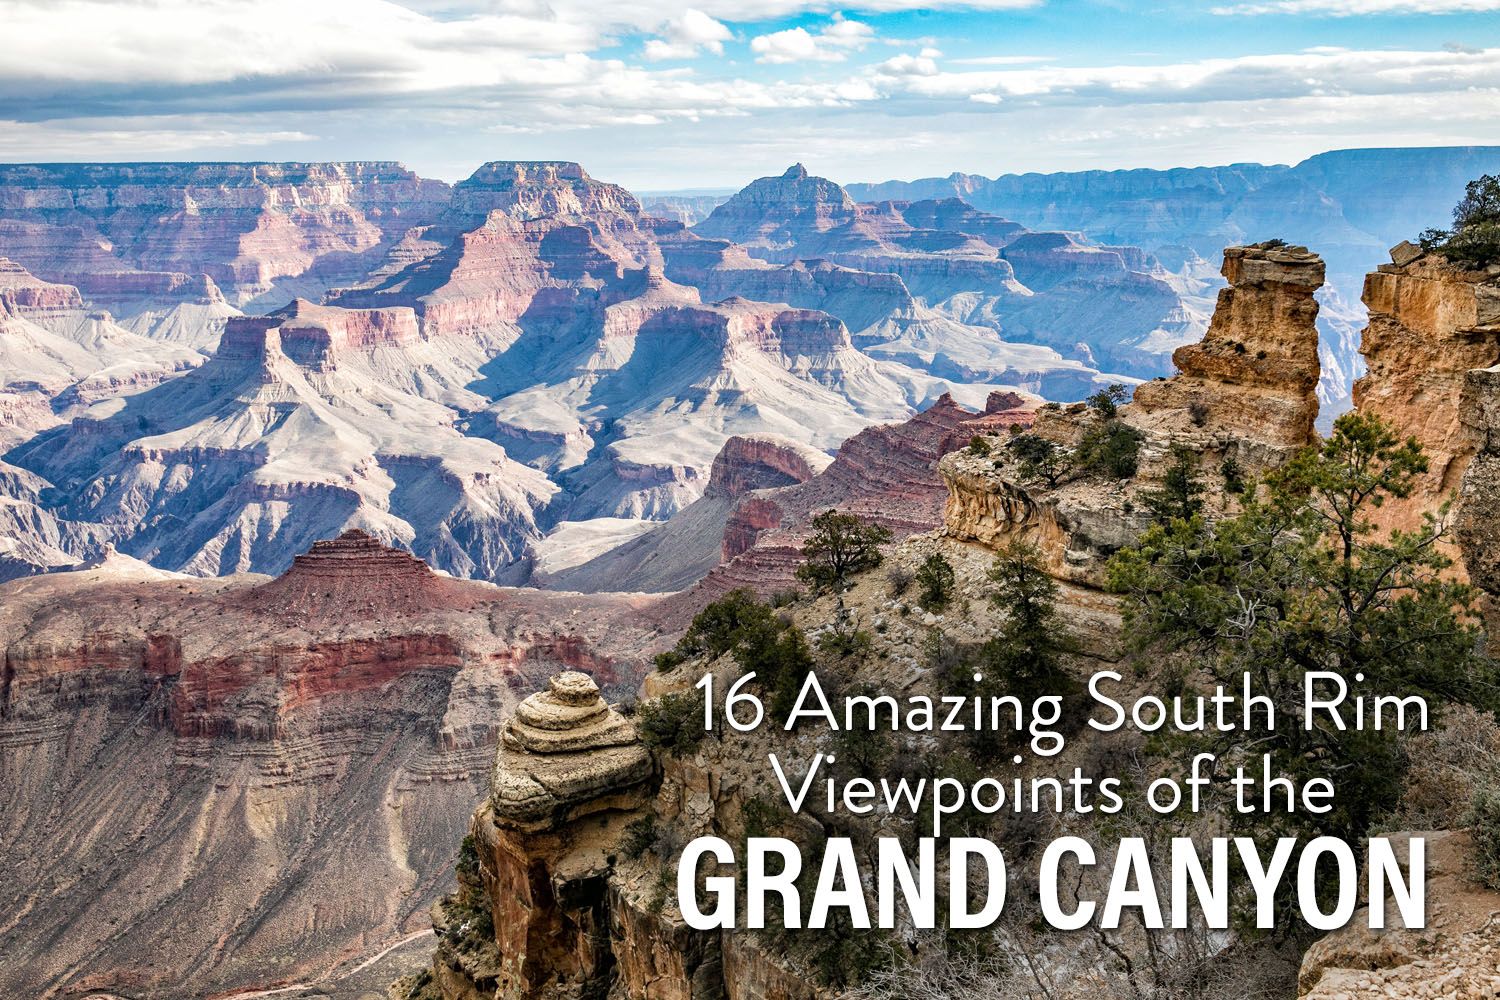 Grand Canyon National Park: A Guide For Planning A Perfect Trip!